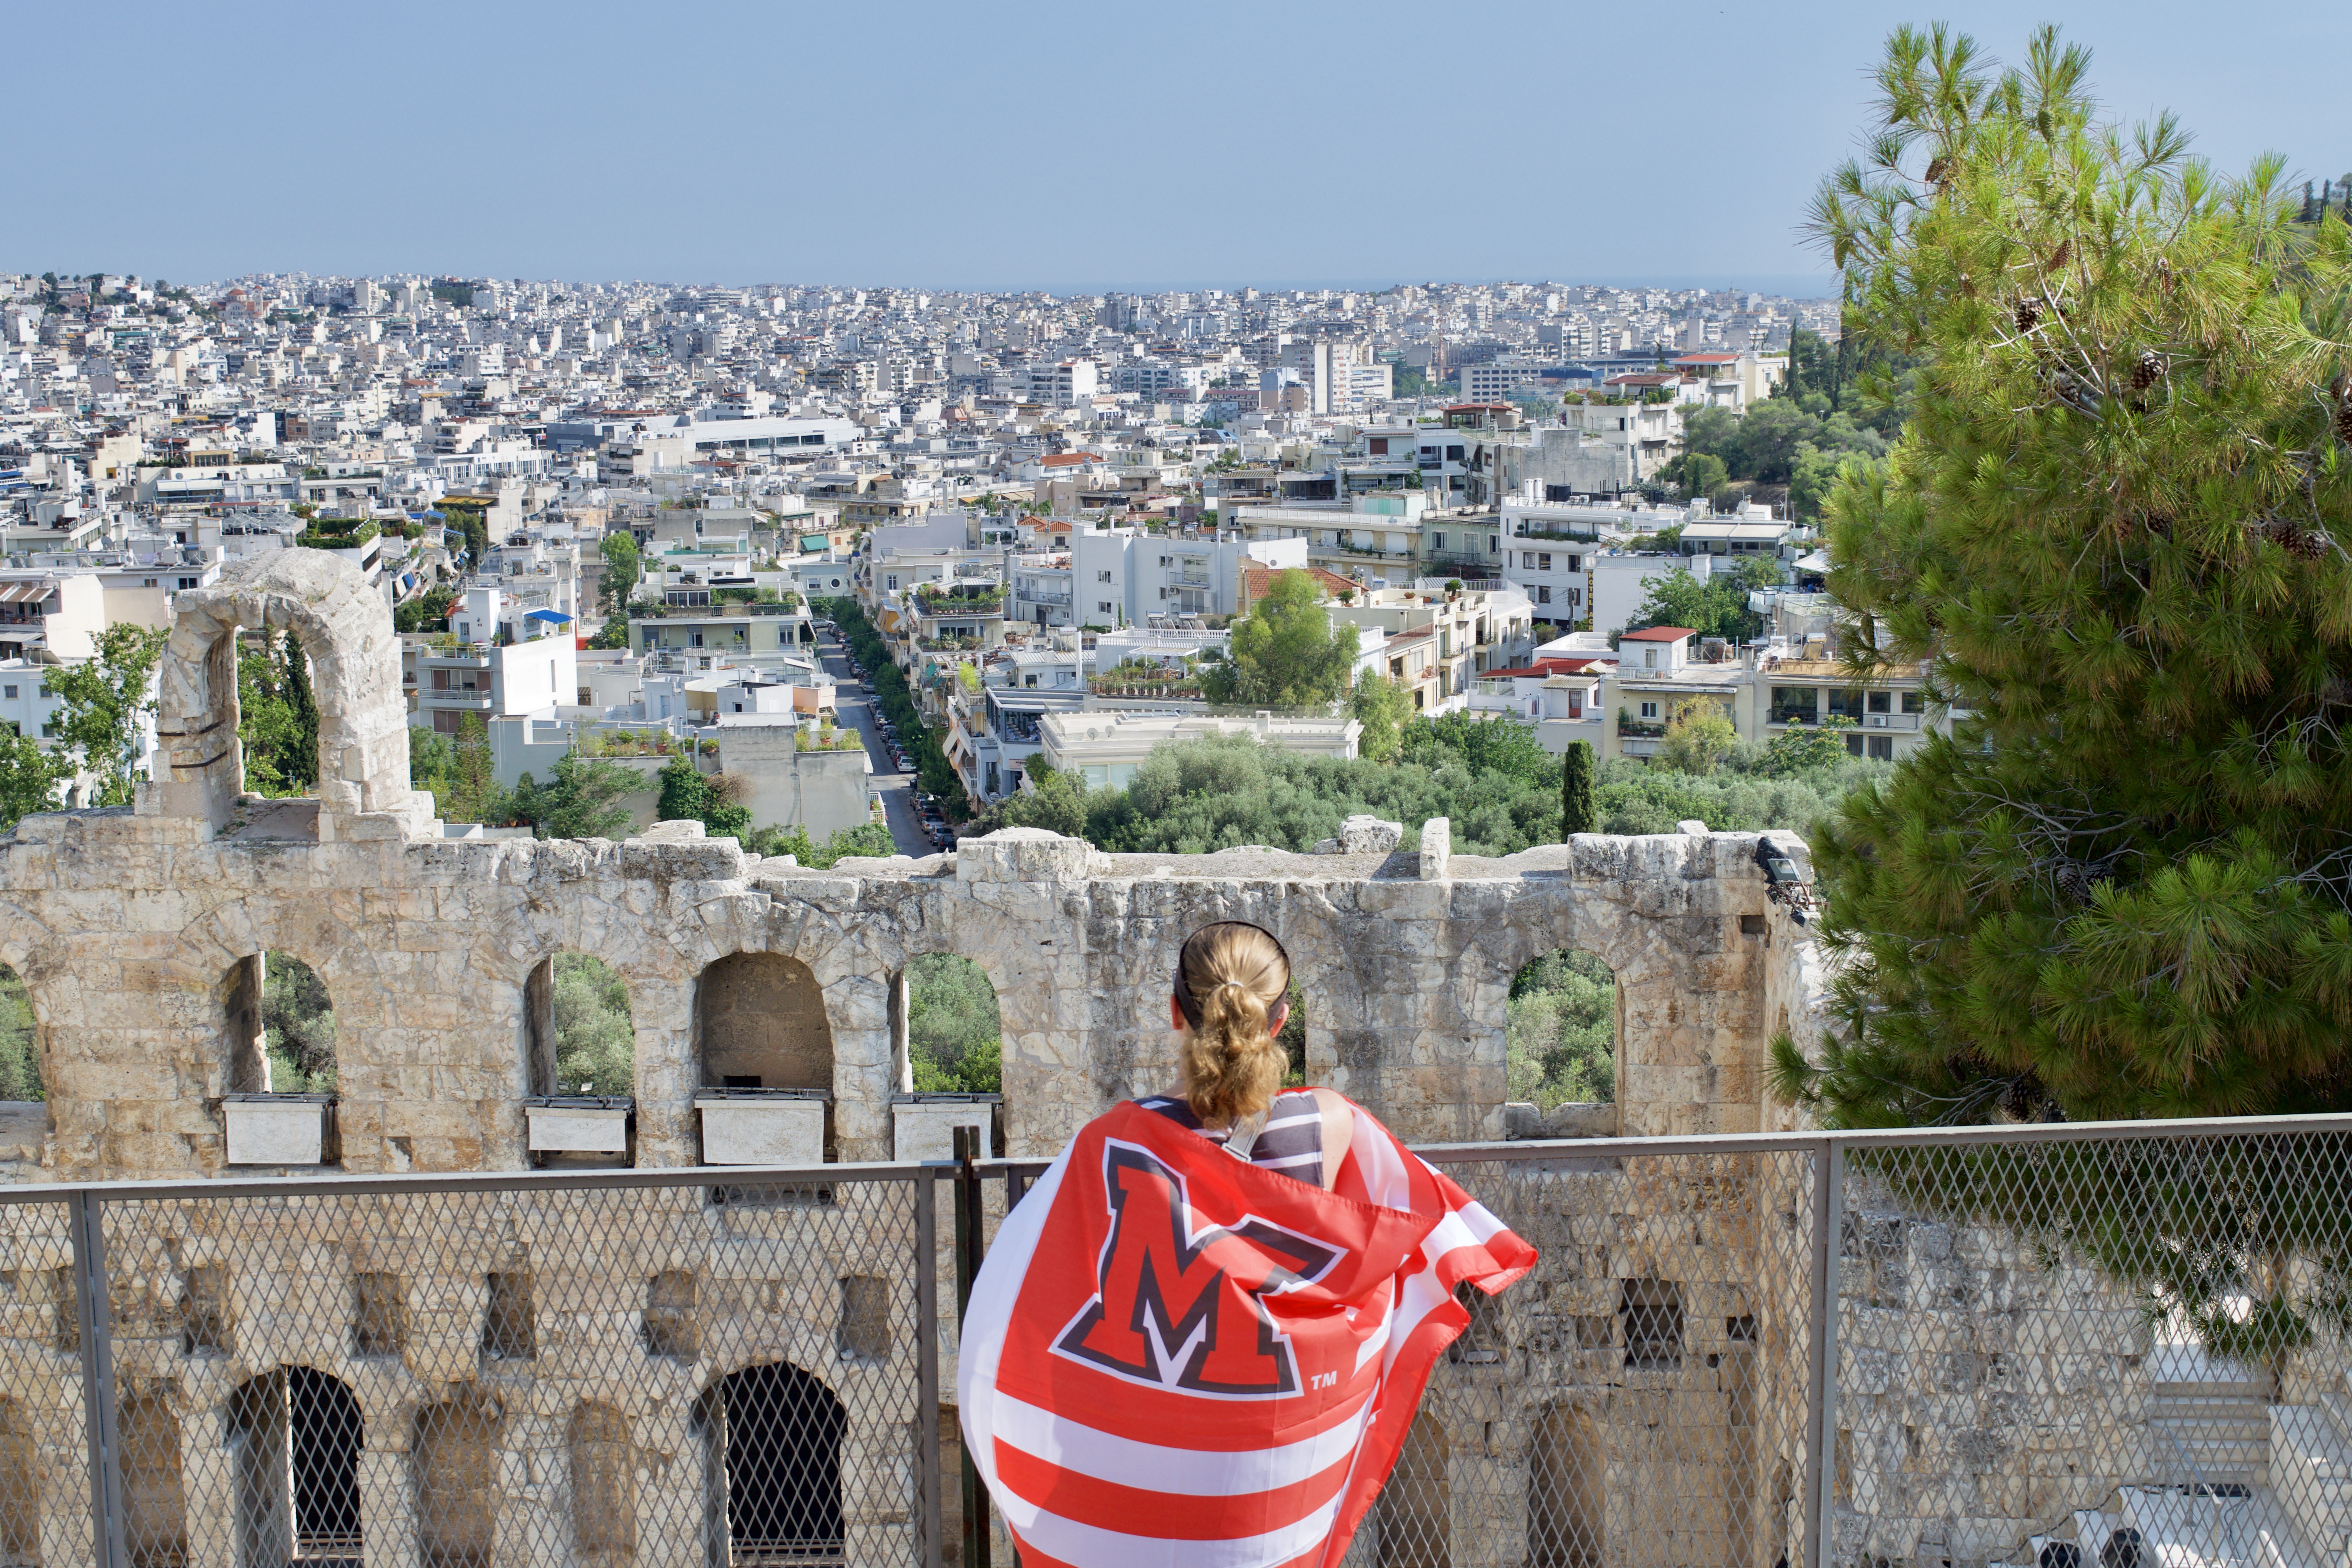 A person stands overlooking Athens, Greece, with a red Miami flag draped over their shoulders